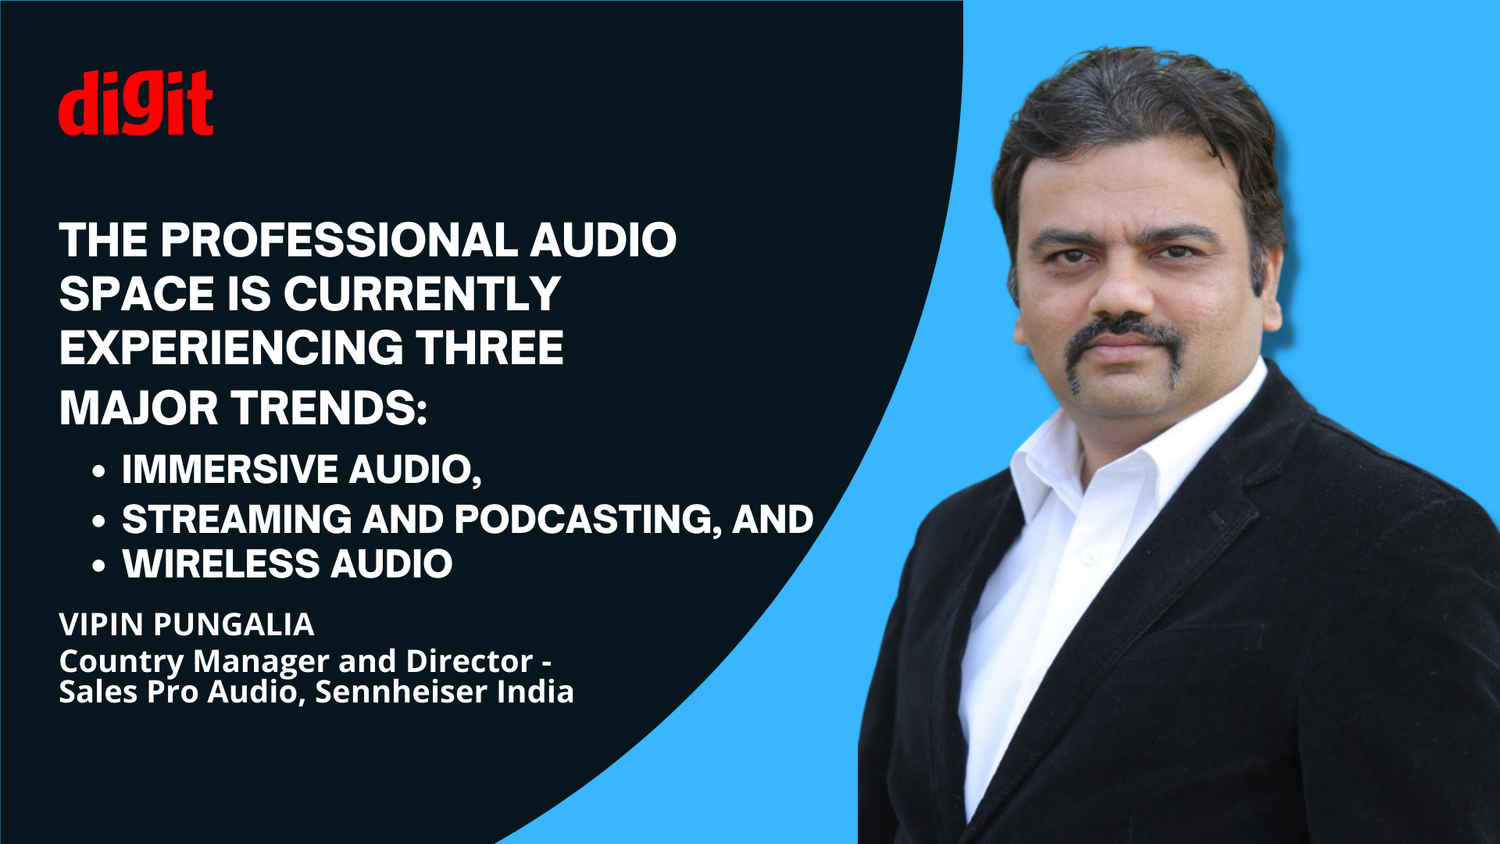 Streaming and podcasting driving demand for high quality audio equipment, says Sennheiser’s Vipin Pungalia